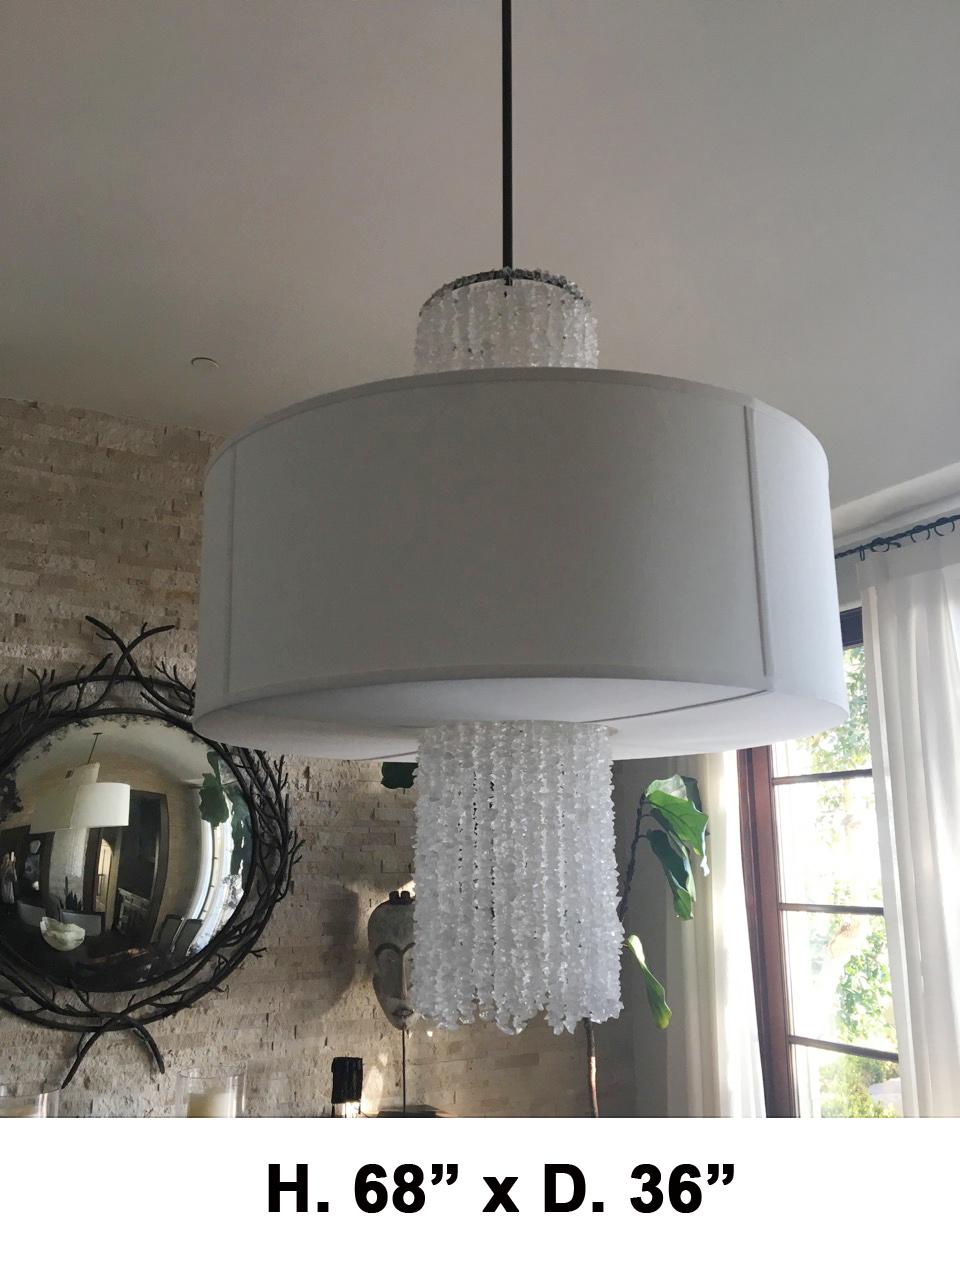 Lovely Round Modern style Rock Crystal 8 light Chandelier, with rock crystal strand enhancement in the water fall motif.
Shade is included
in excellent condition